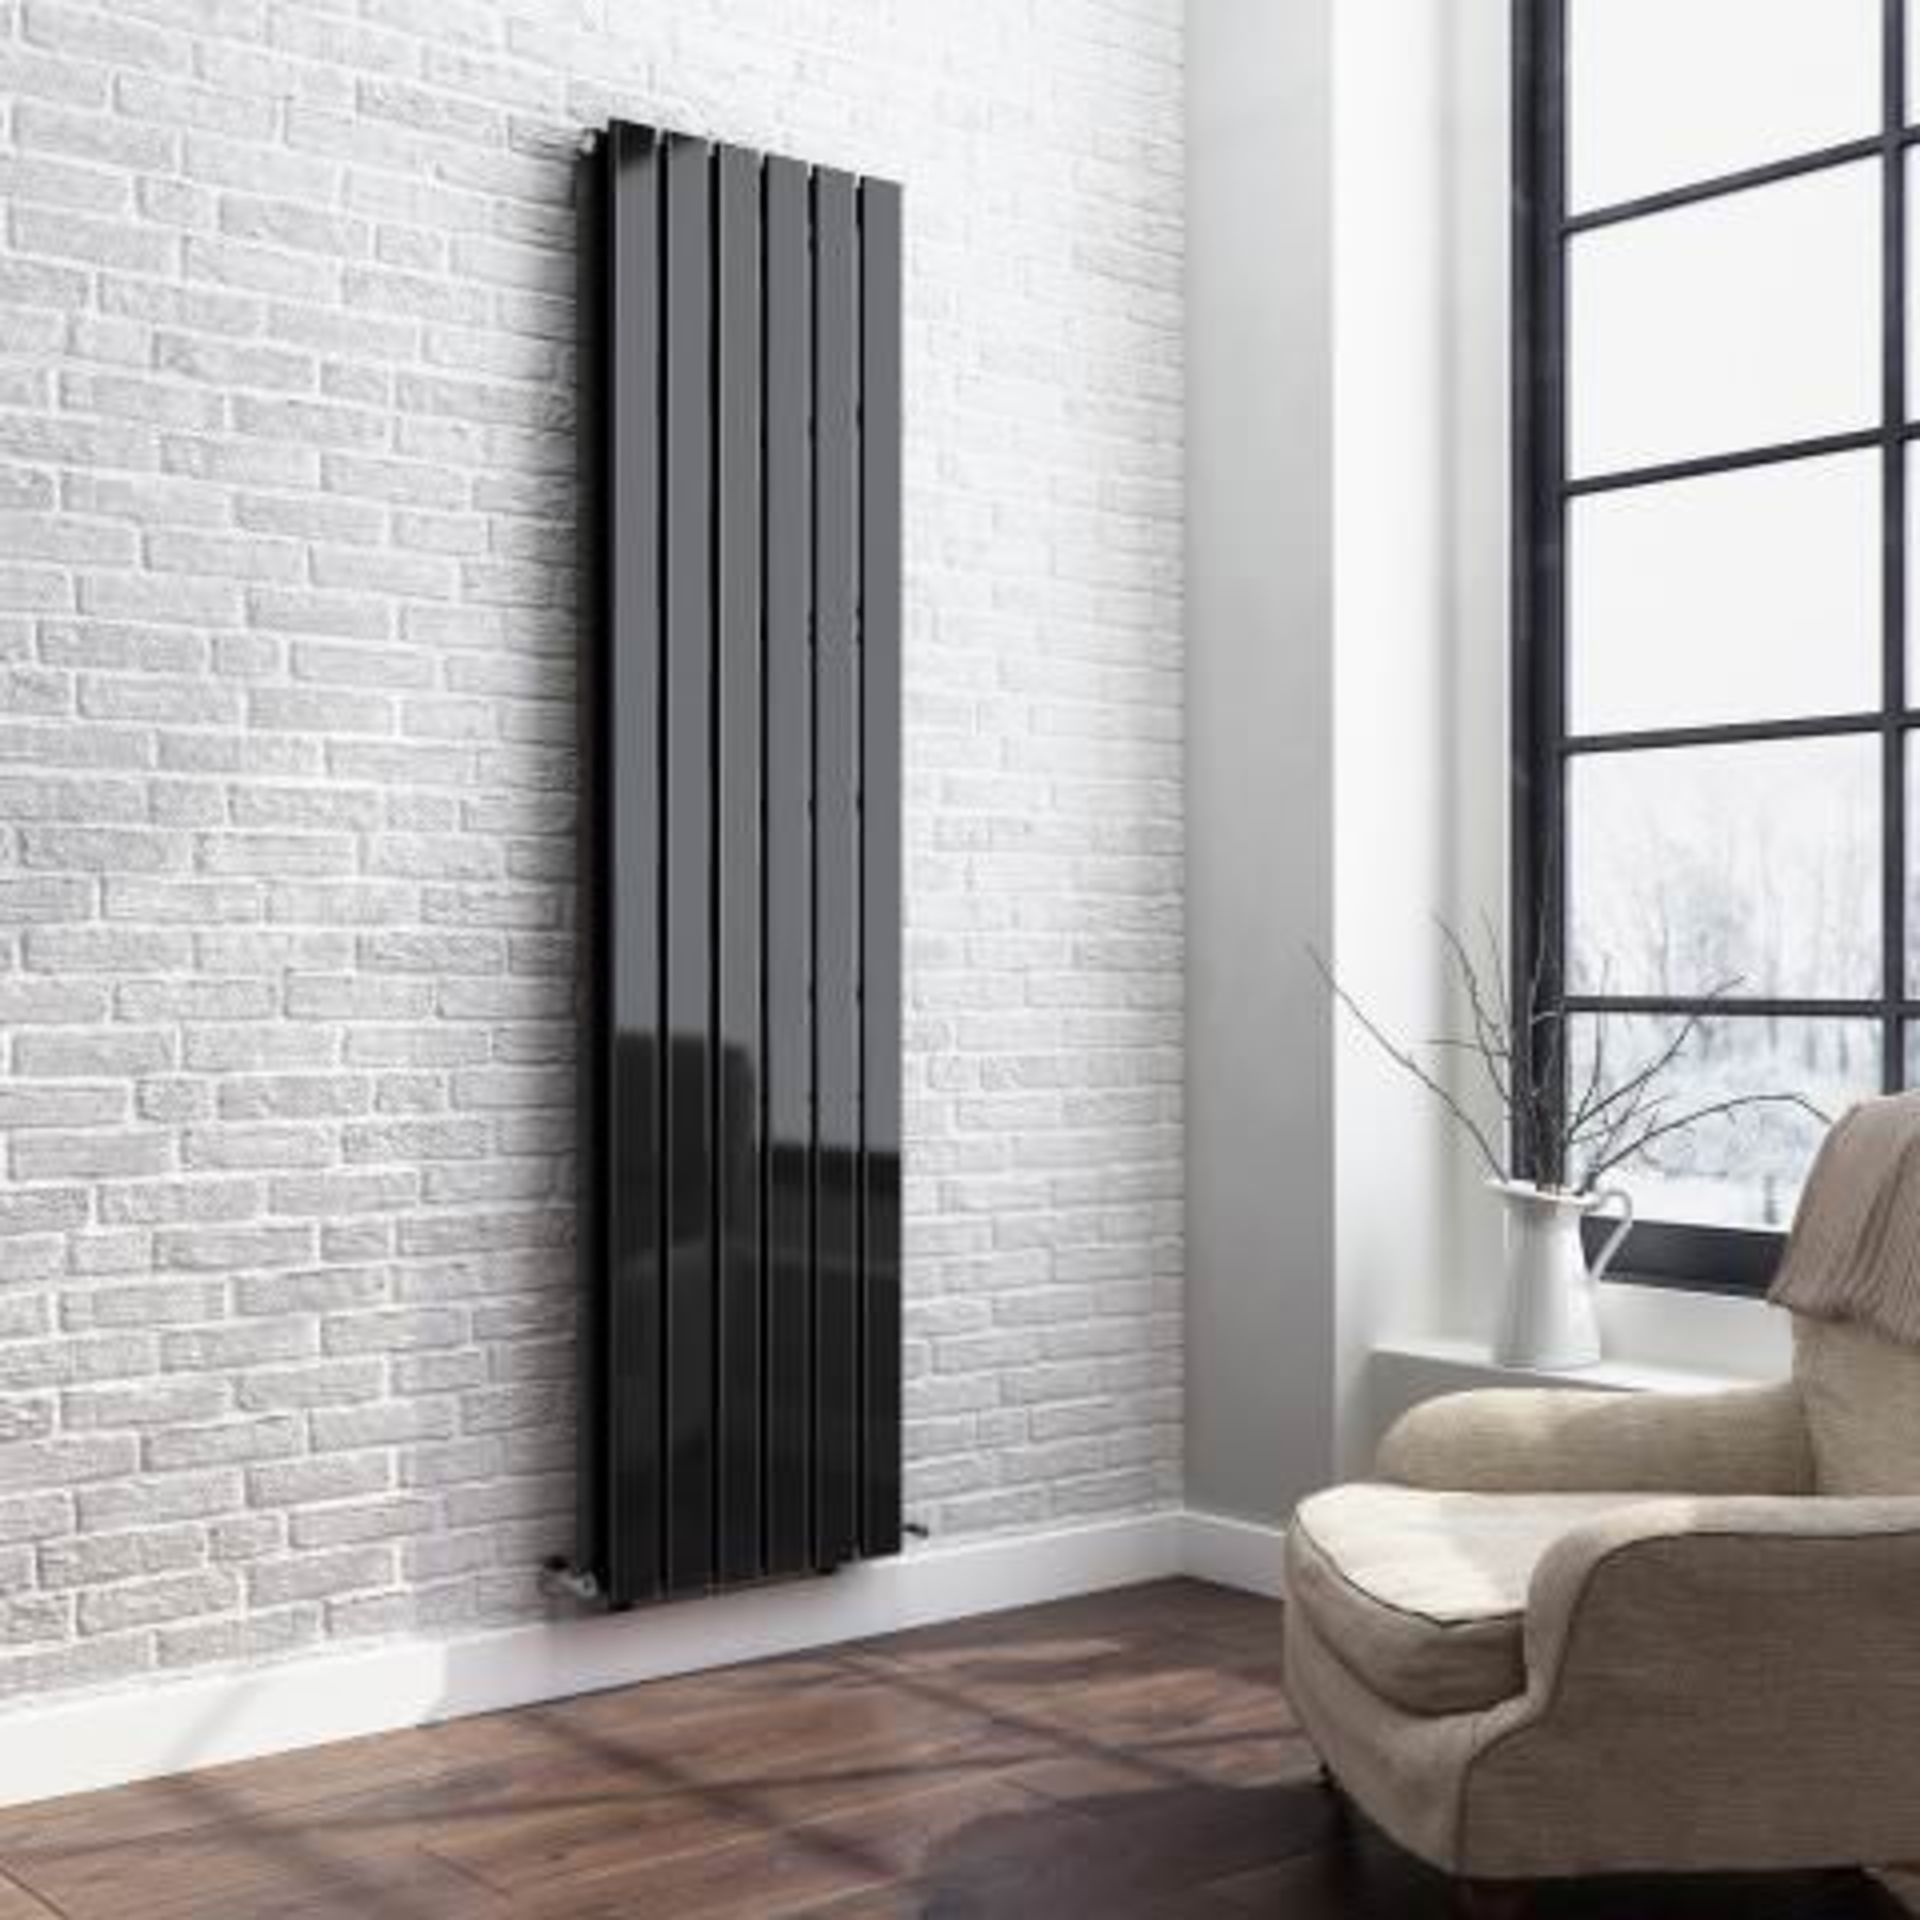 (M77) 1800x458mm Gloss Black Double Flat Panel Vertical Radiator - Thera Range. RRP £524.99. Our - Image 3 of 4